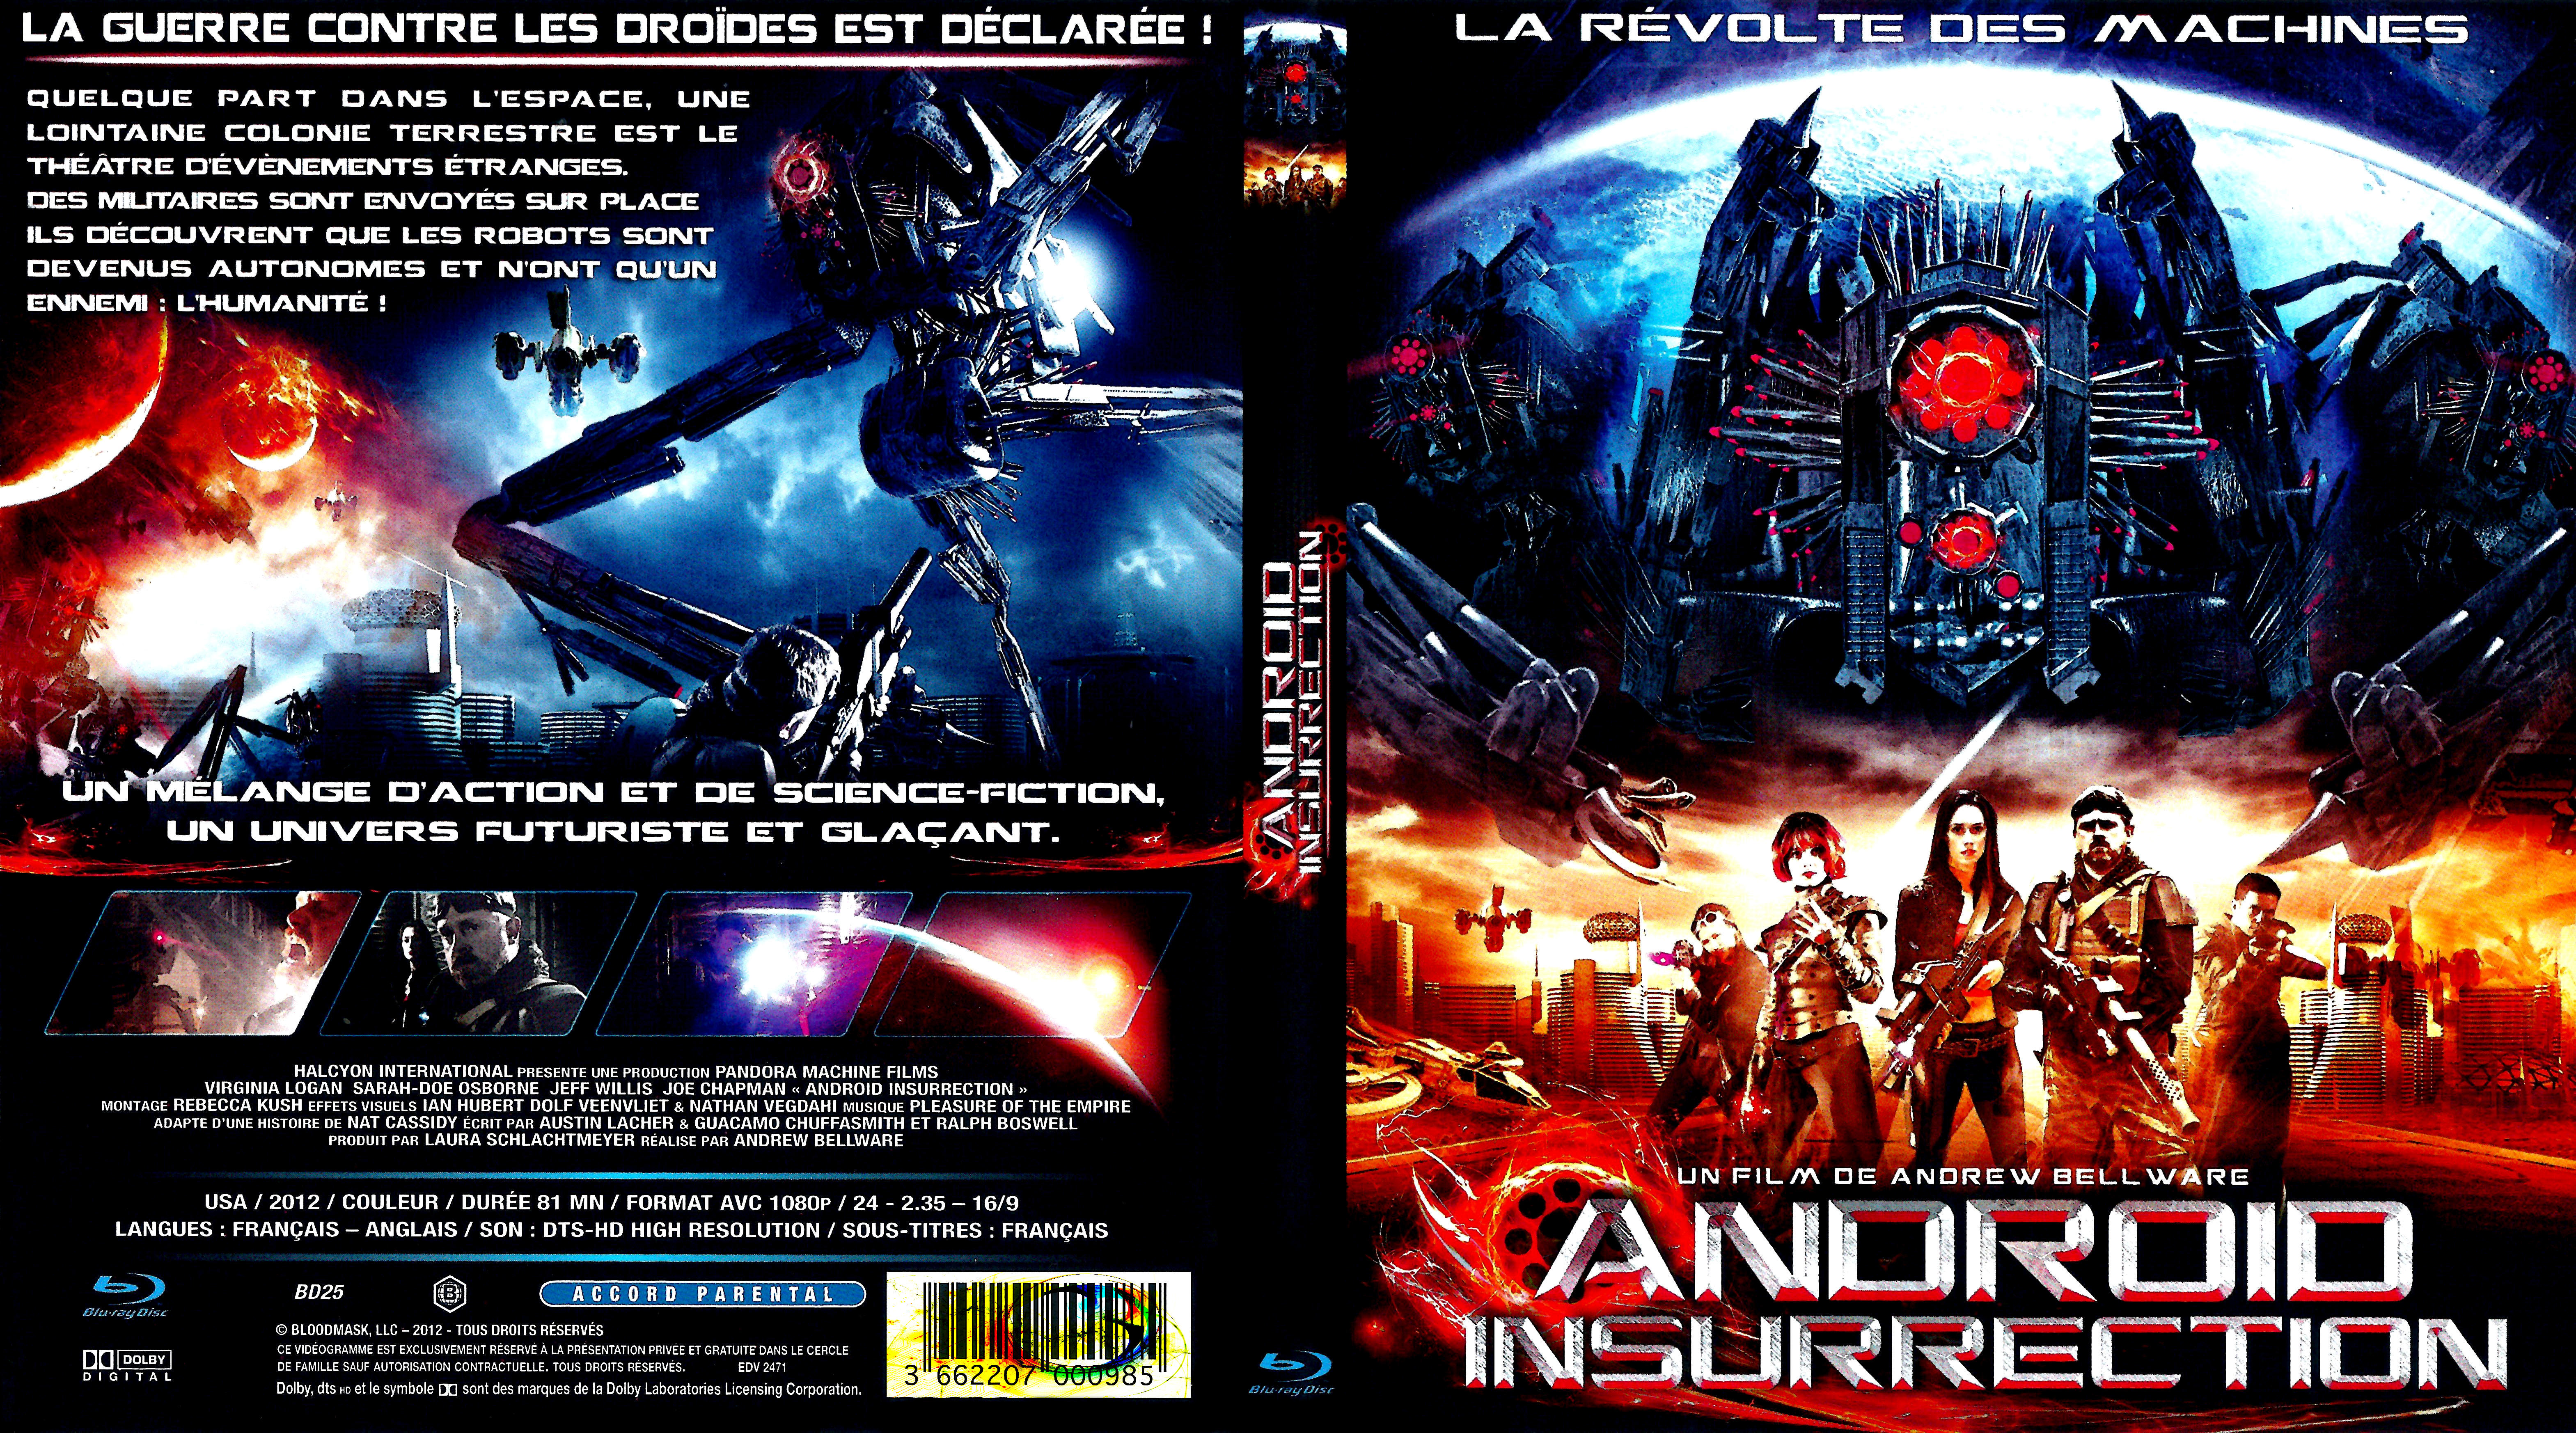 Jaquette DVD Android insurrection (BLU-RAY)